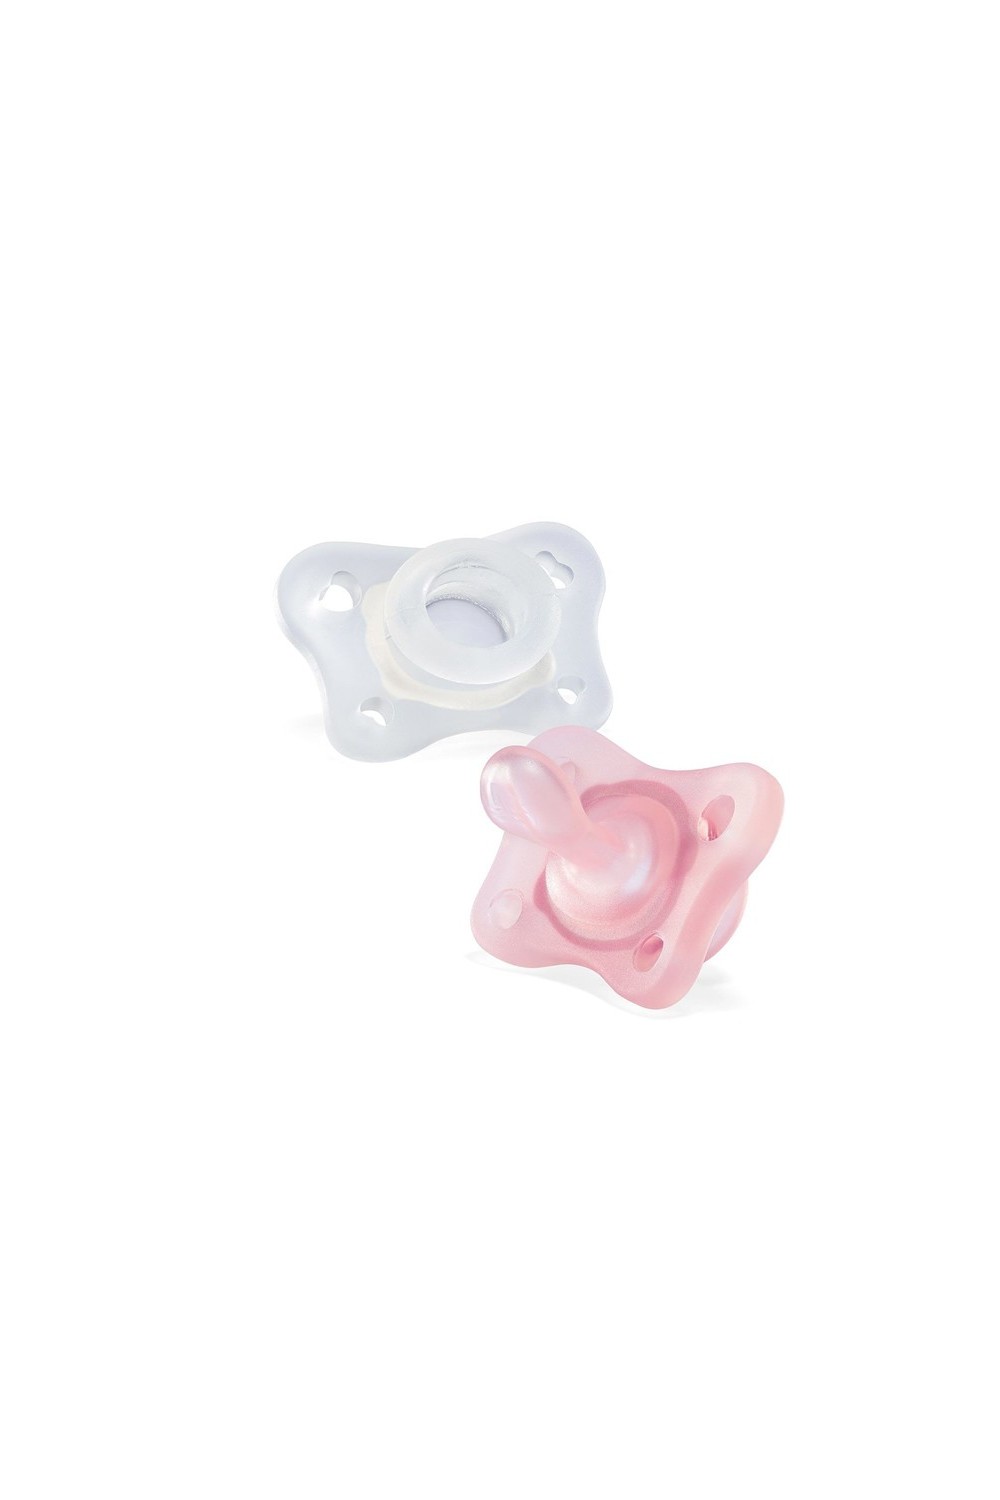 Chicco Physio Soft Soother 2 uts